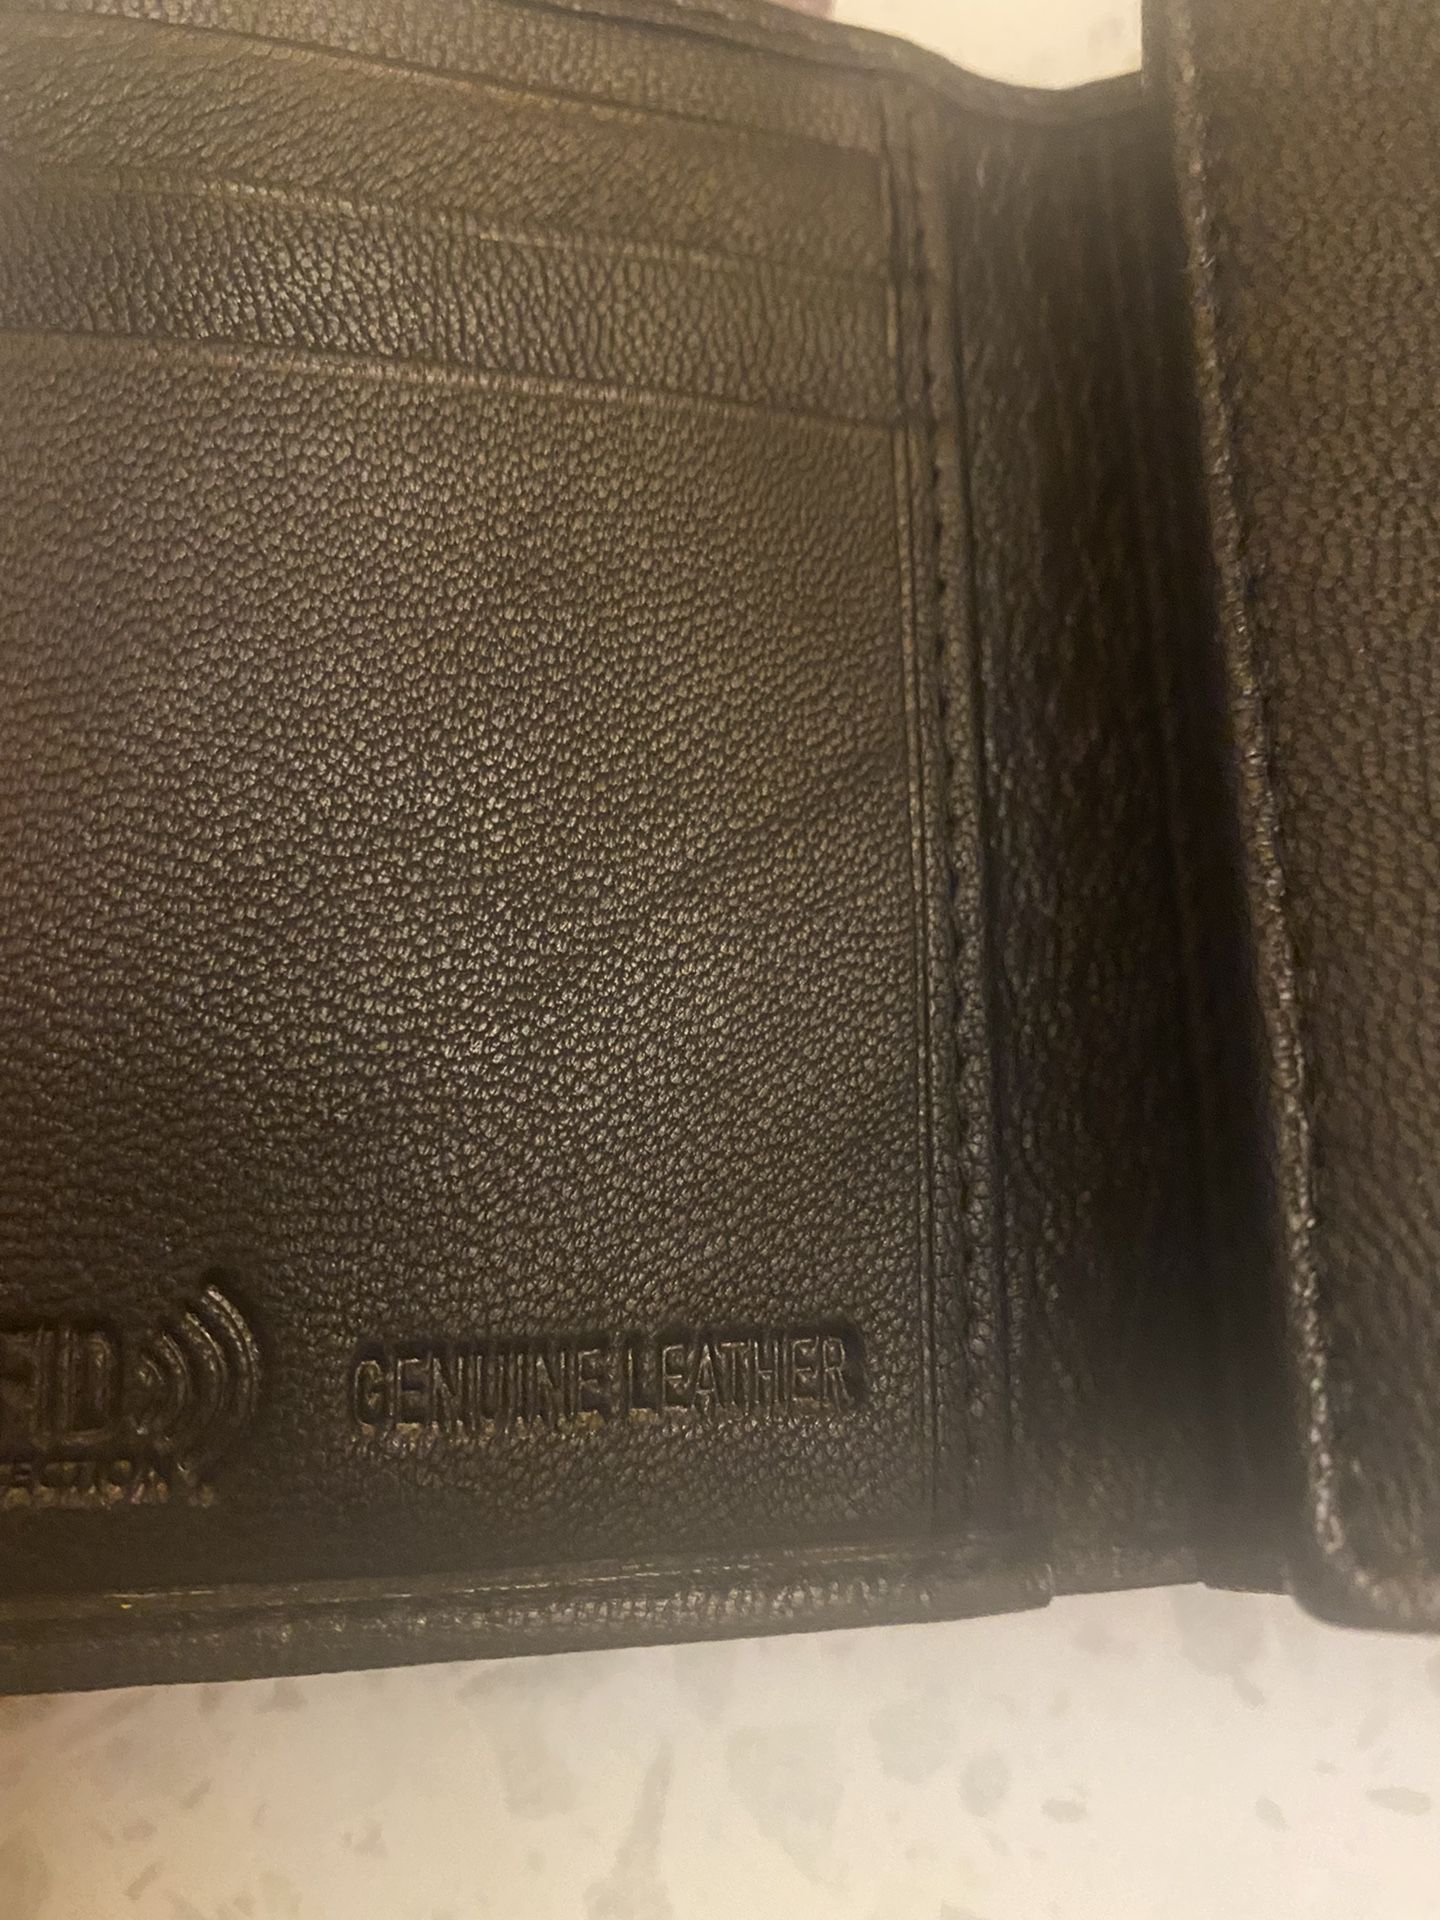 Authentic Chanel Black Calfskin Leather CC Logo Bifold Long Wallet for Sale  in Ewa Beach, HI - OfferUp